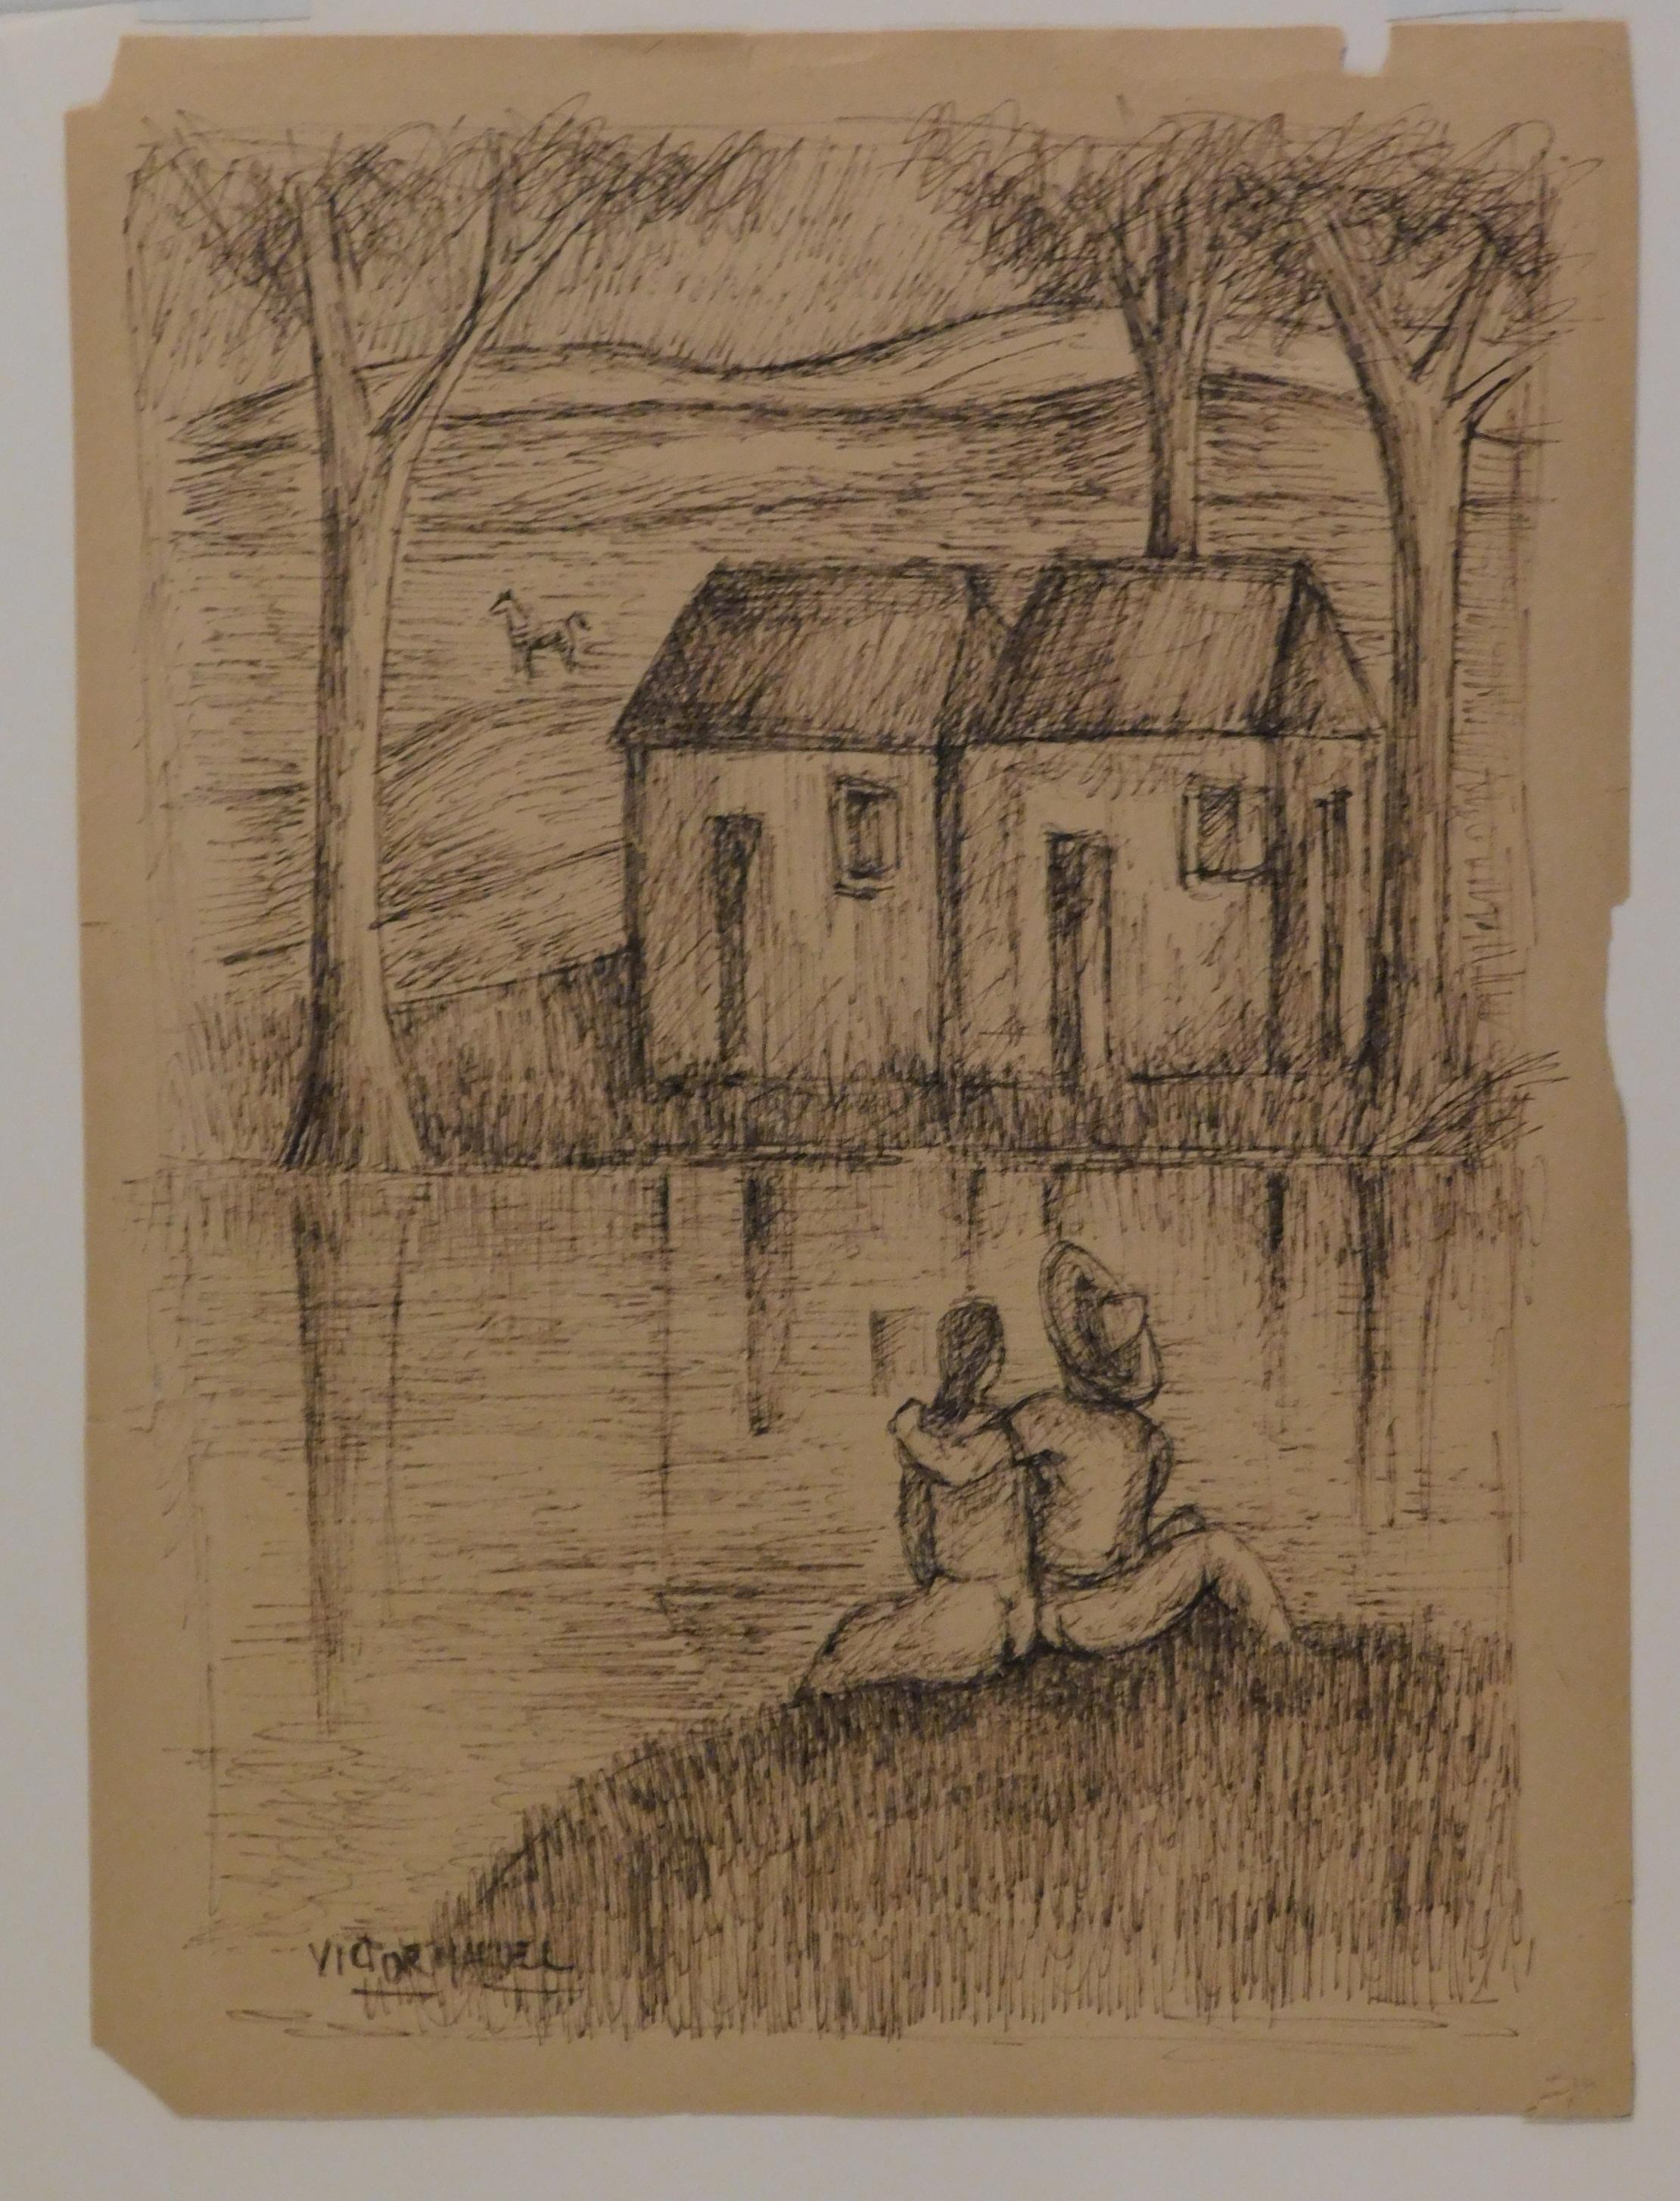 Original pen & ink drawing by well-known Cuban artist Victor Manuel (1897-1969).
The subject is a man and woman seated near the water. 
This pen and ink drawing on graph paper bears a rubber stamp on the verso.
Image measures: 10